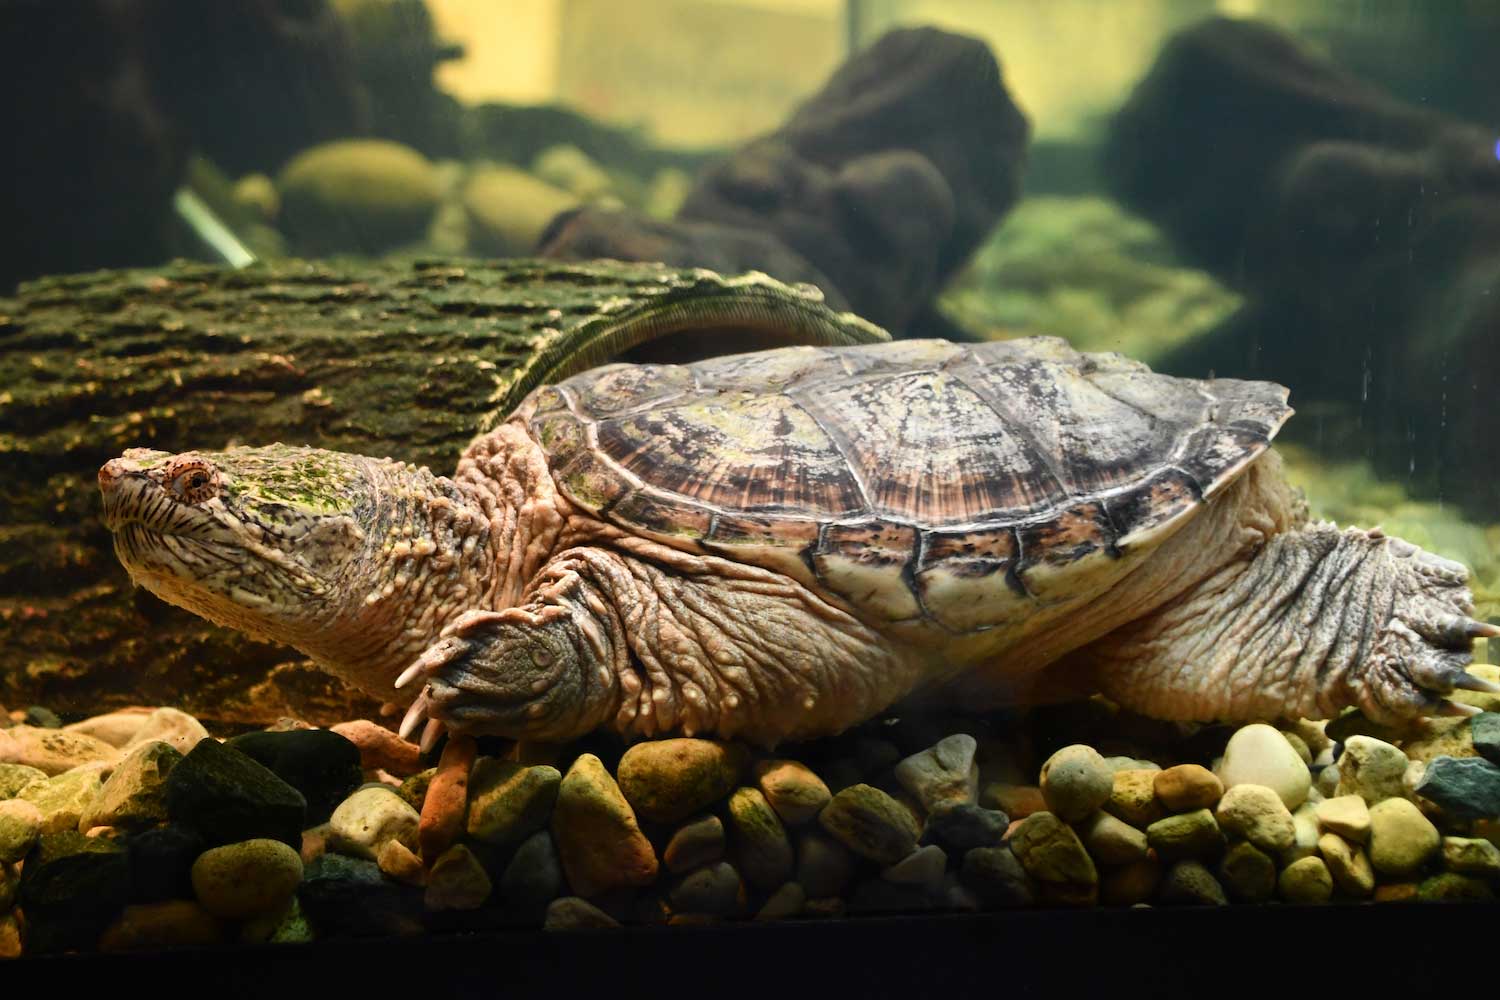 A snapping turtle in a tank.